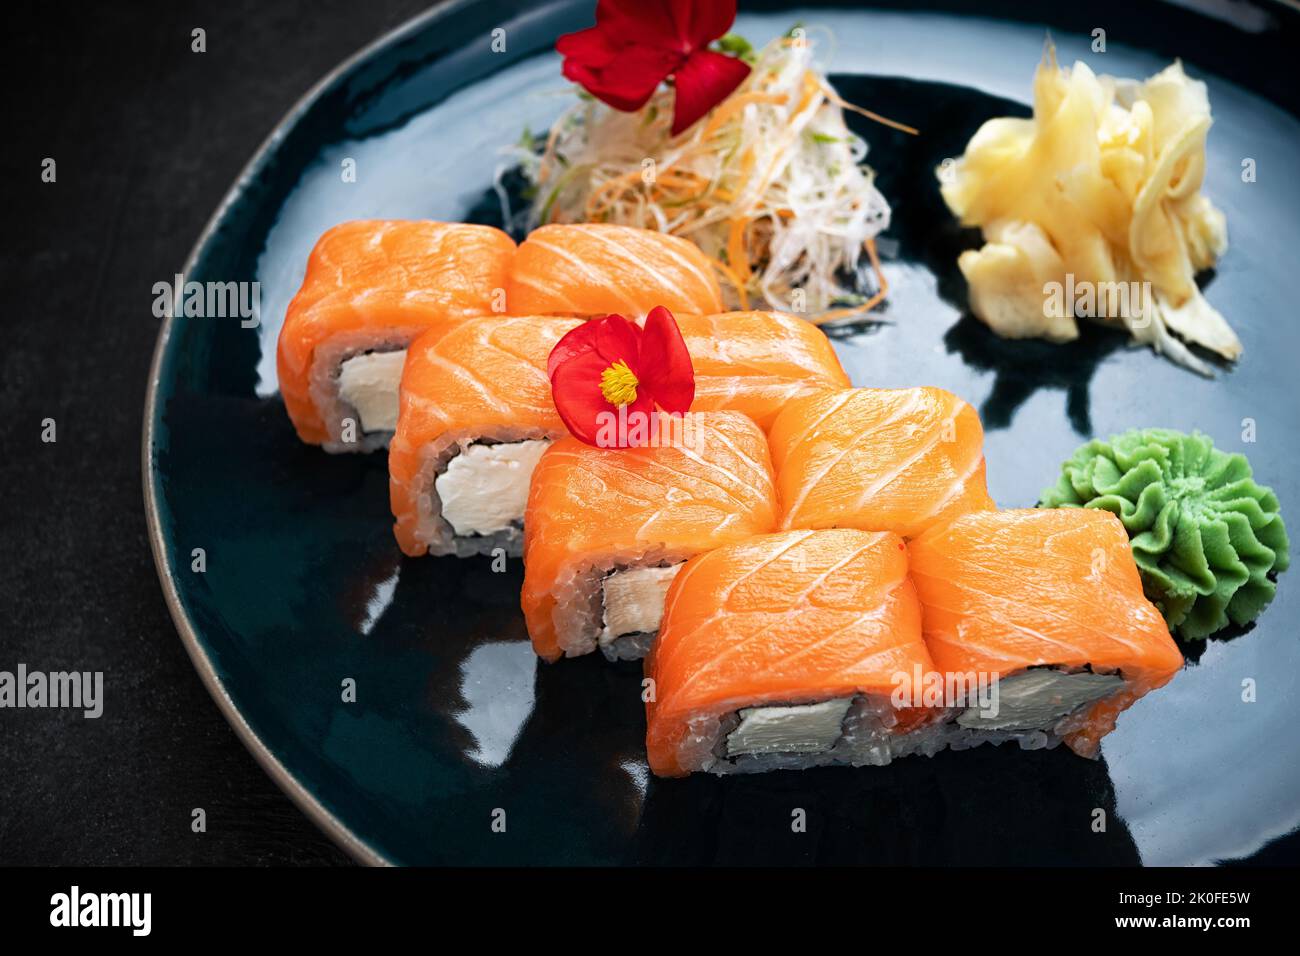 Sushi rolls Philadelphia with cheese and salmon, on a dark background Stock Photo